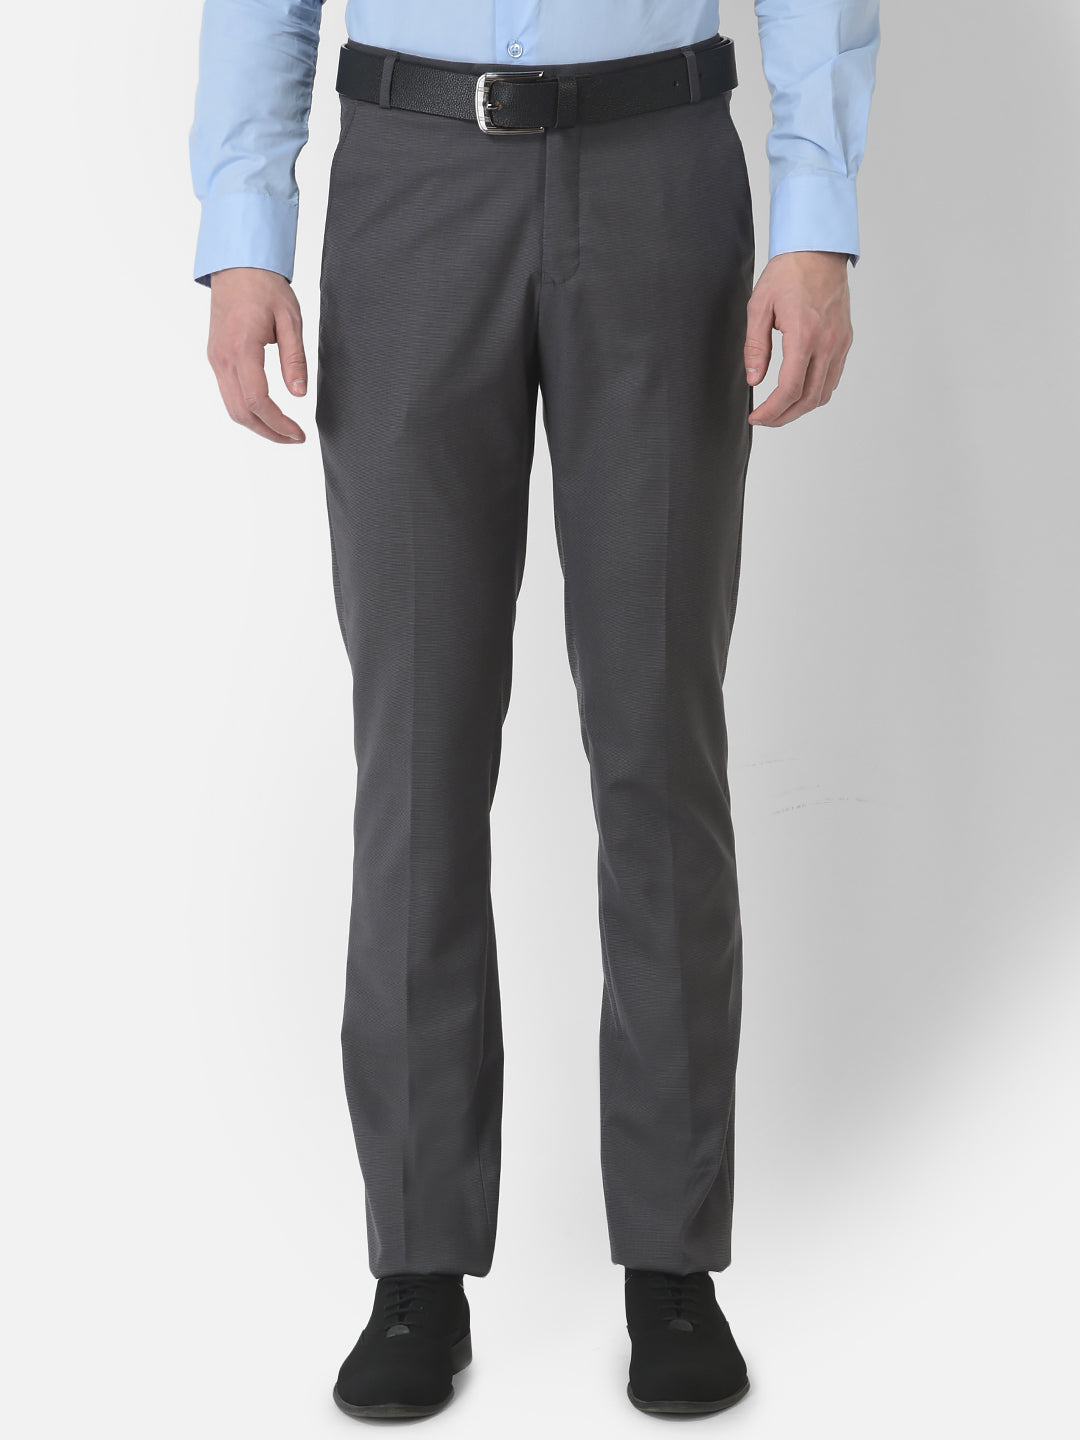 Pin on casual and formal pants/trousers for men